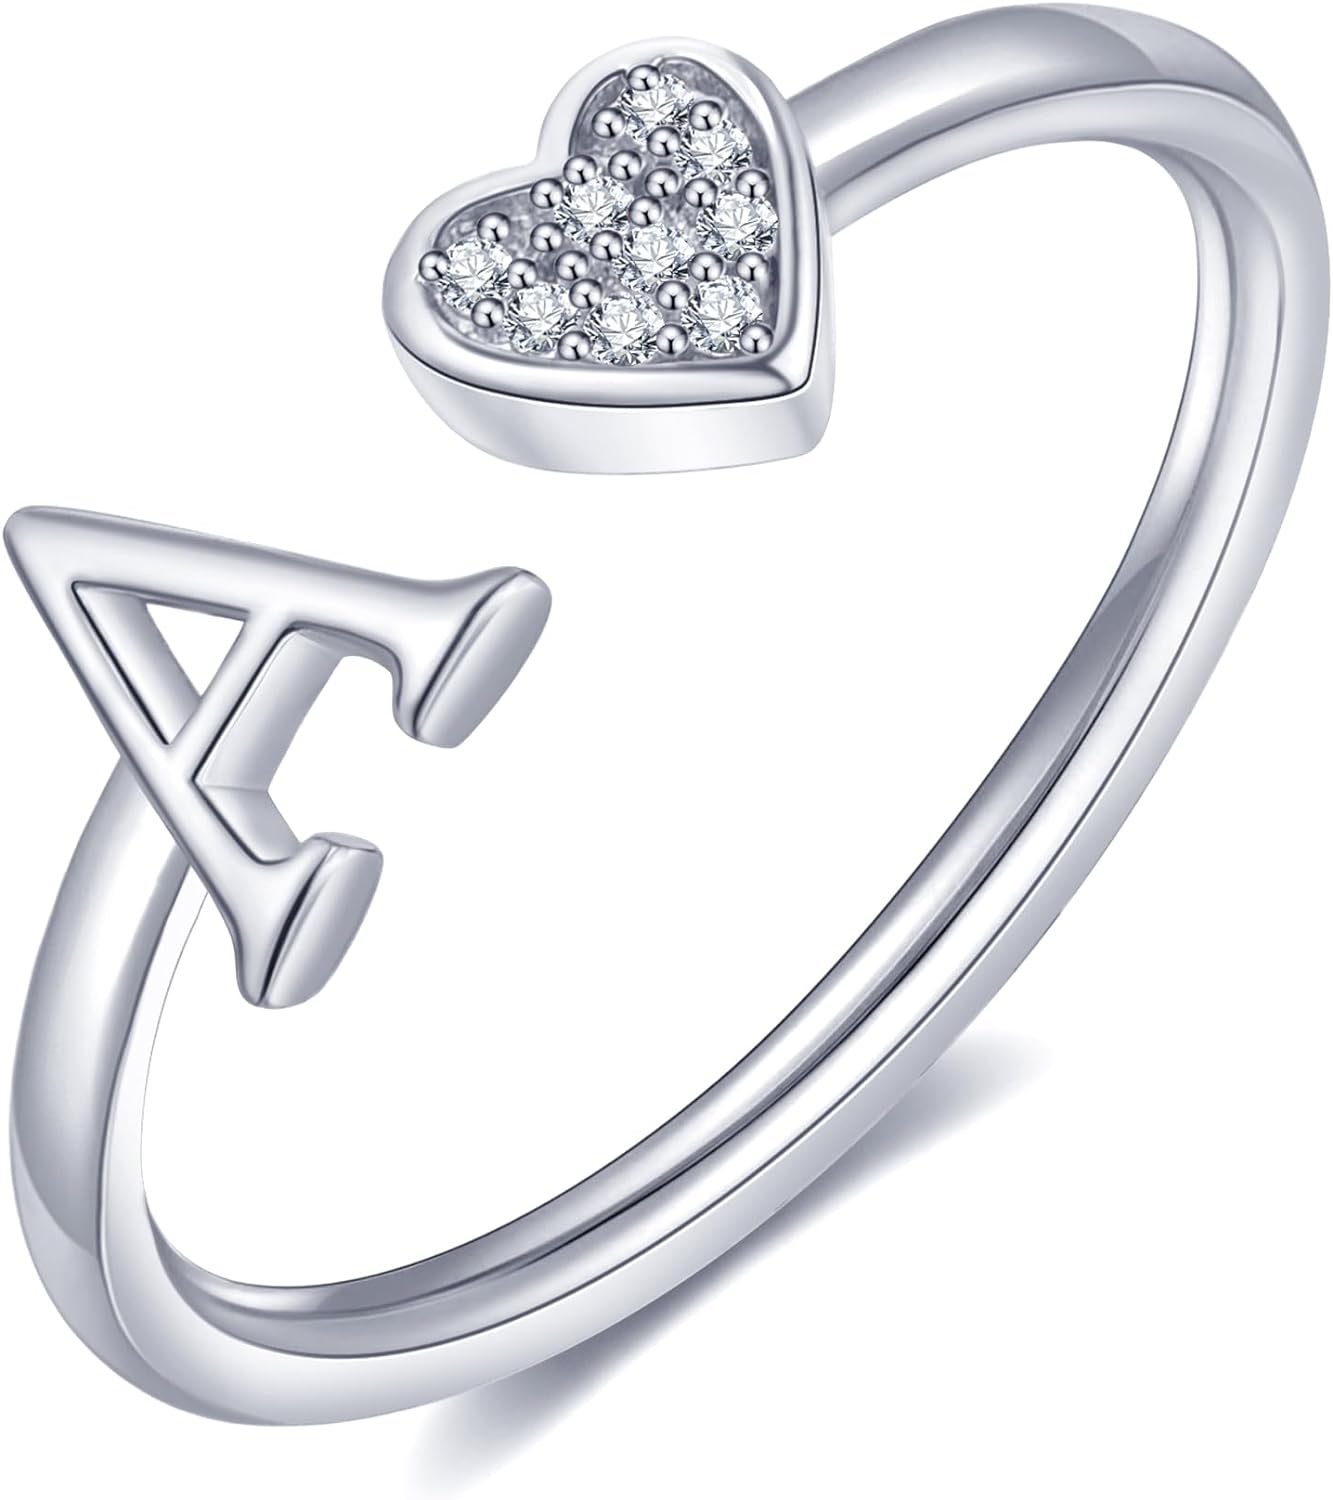 WFYOU Heart Initial Ring for Women Teen Girls Silver Rose Gold Plated Heart Capital Letter Initial Rings Stackable Rings for Women Girls Adjustable Heart Alphabet Letter Rings Jewelry Gifts for Women